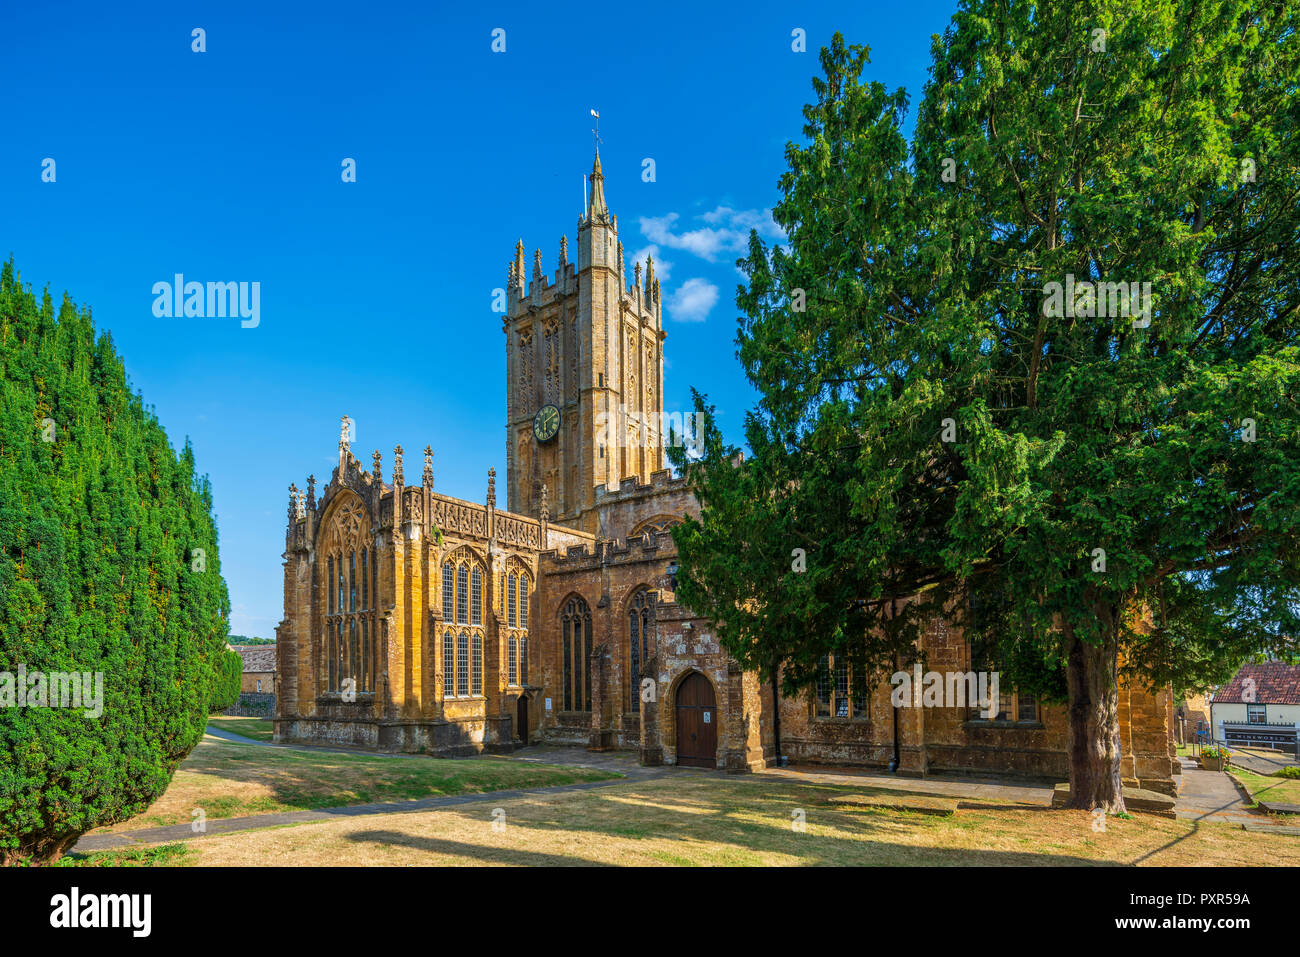 The Church of St Mary, Ilminster, Somerset, England, United Kingdom, Europe. Stock Photo